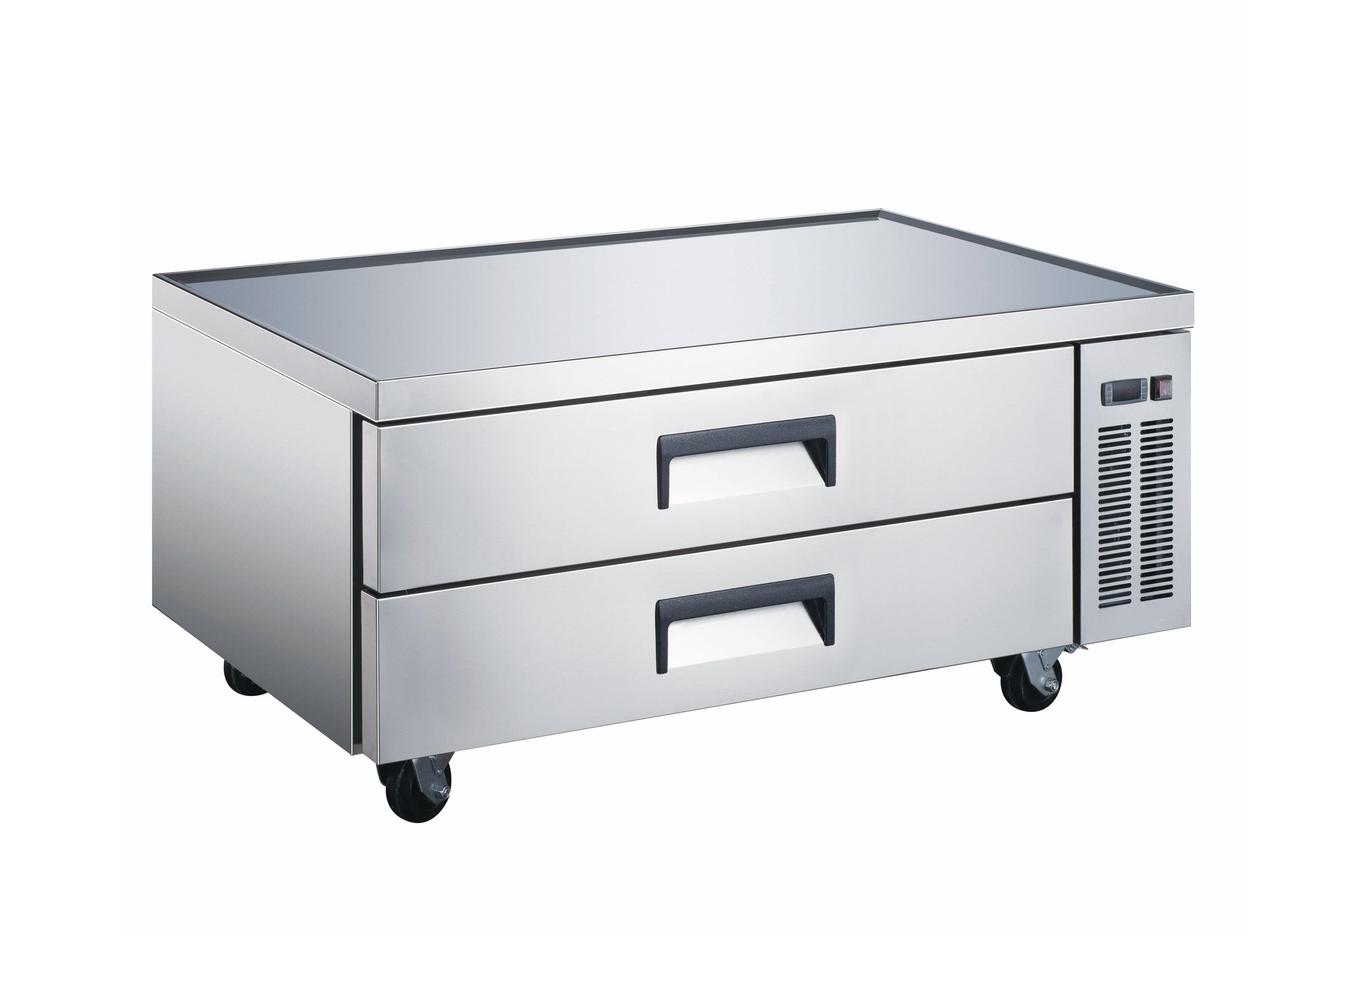 Falcon Food Service ACFB-52 - Item 211922